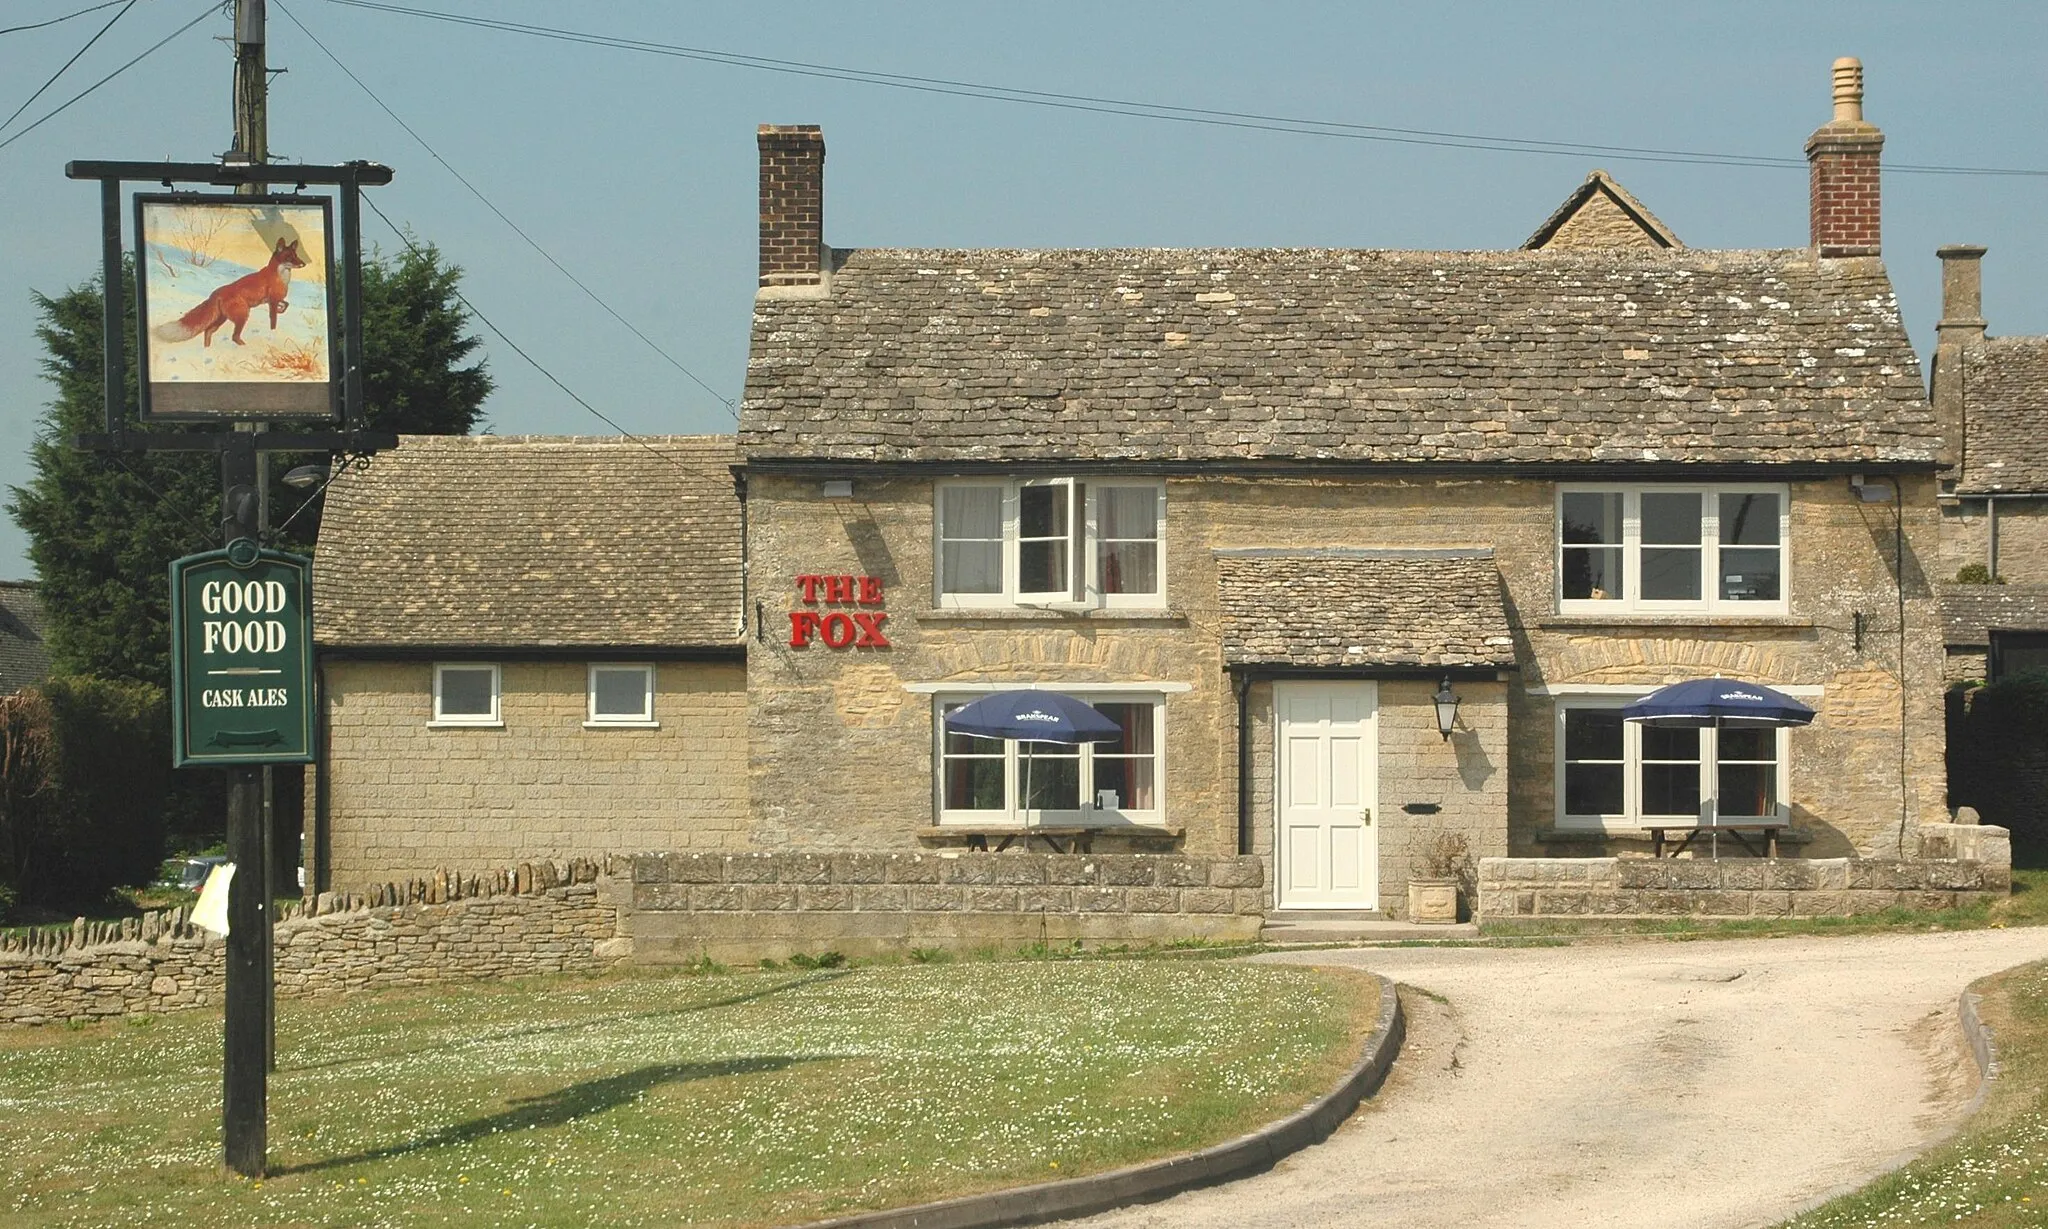 Photo showing: The Fox public house, Leafield, Oxfordshire, seen from east-southeast